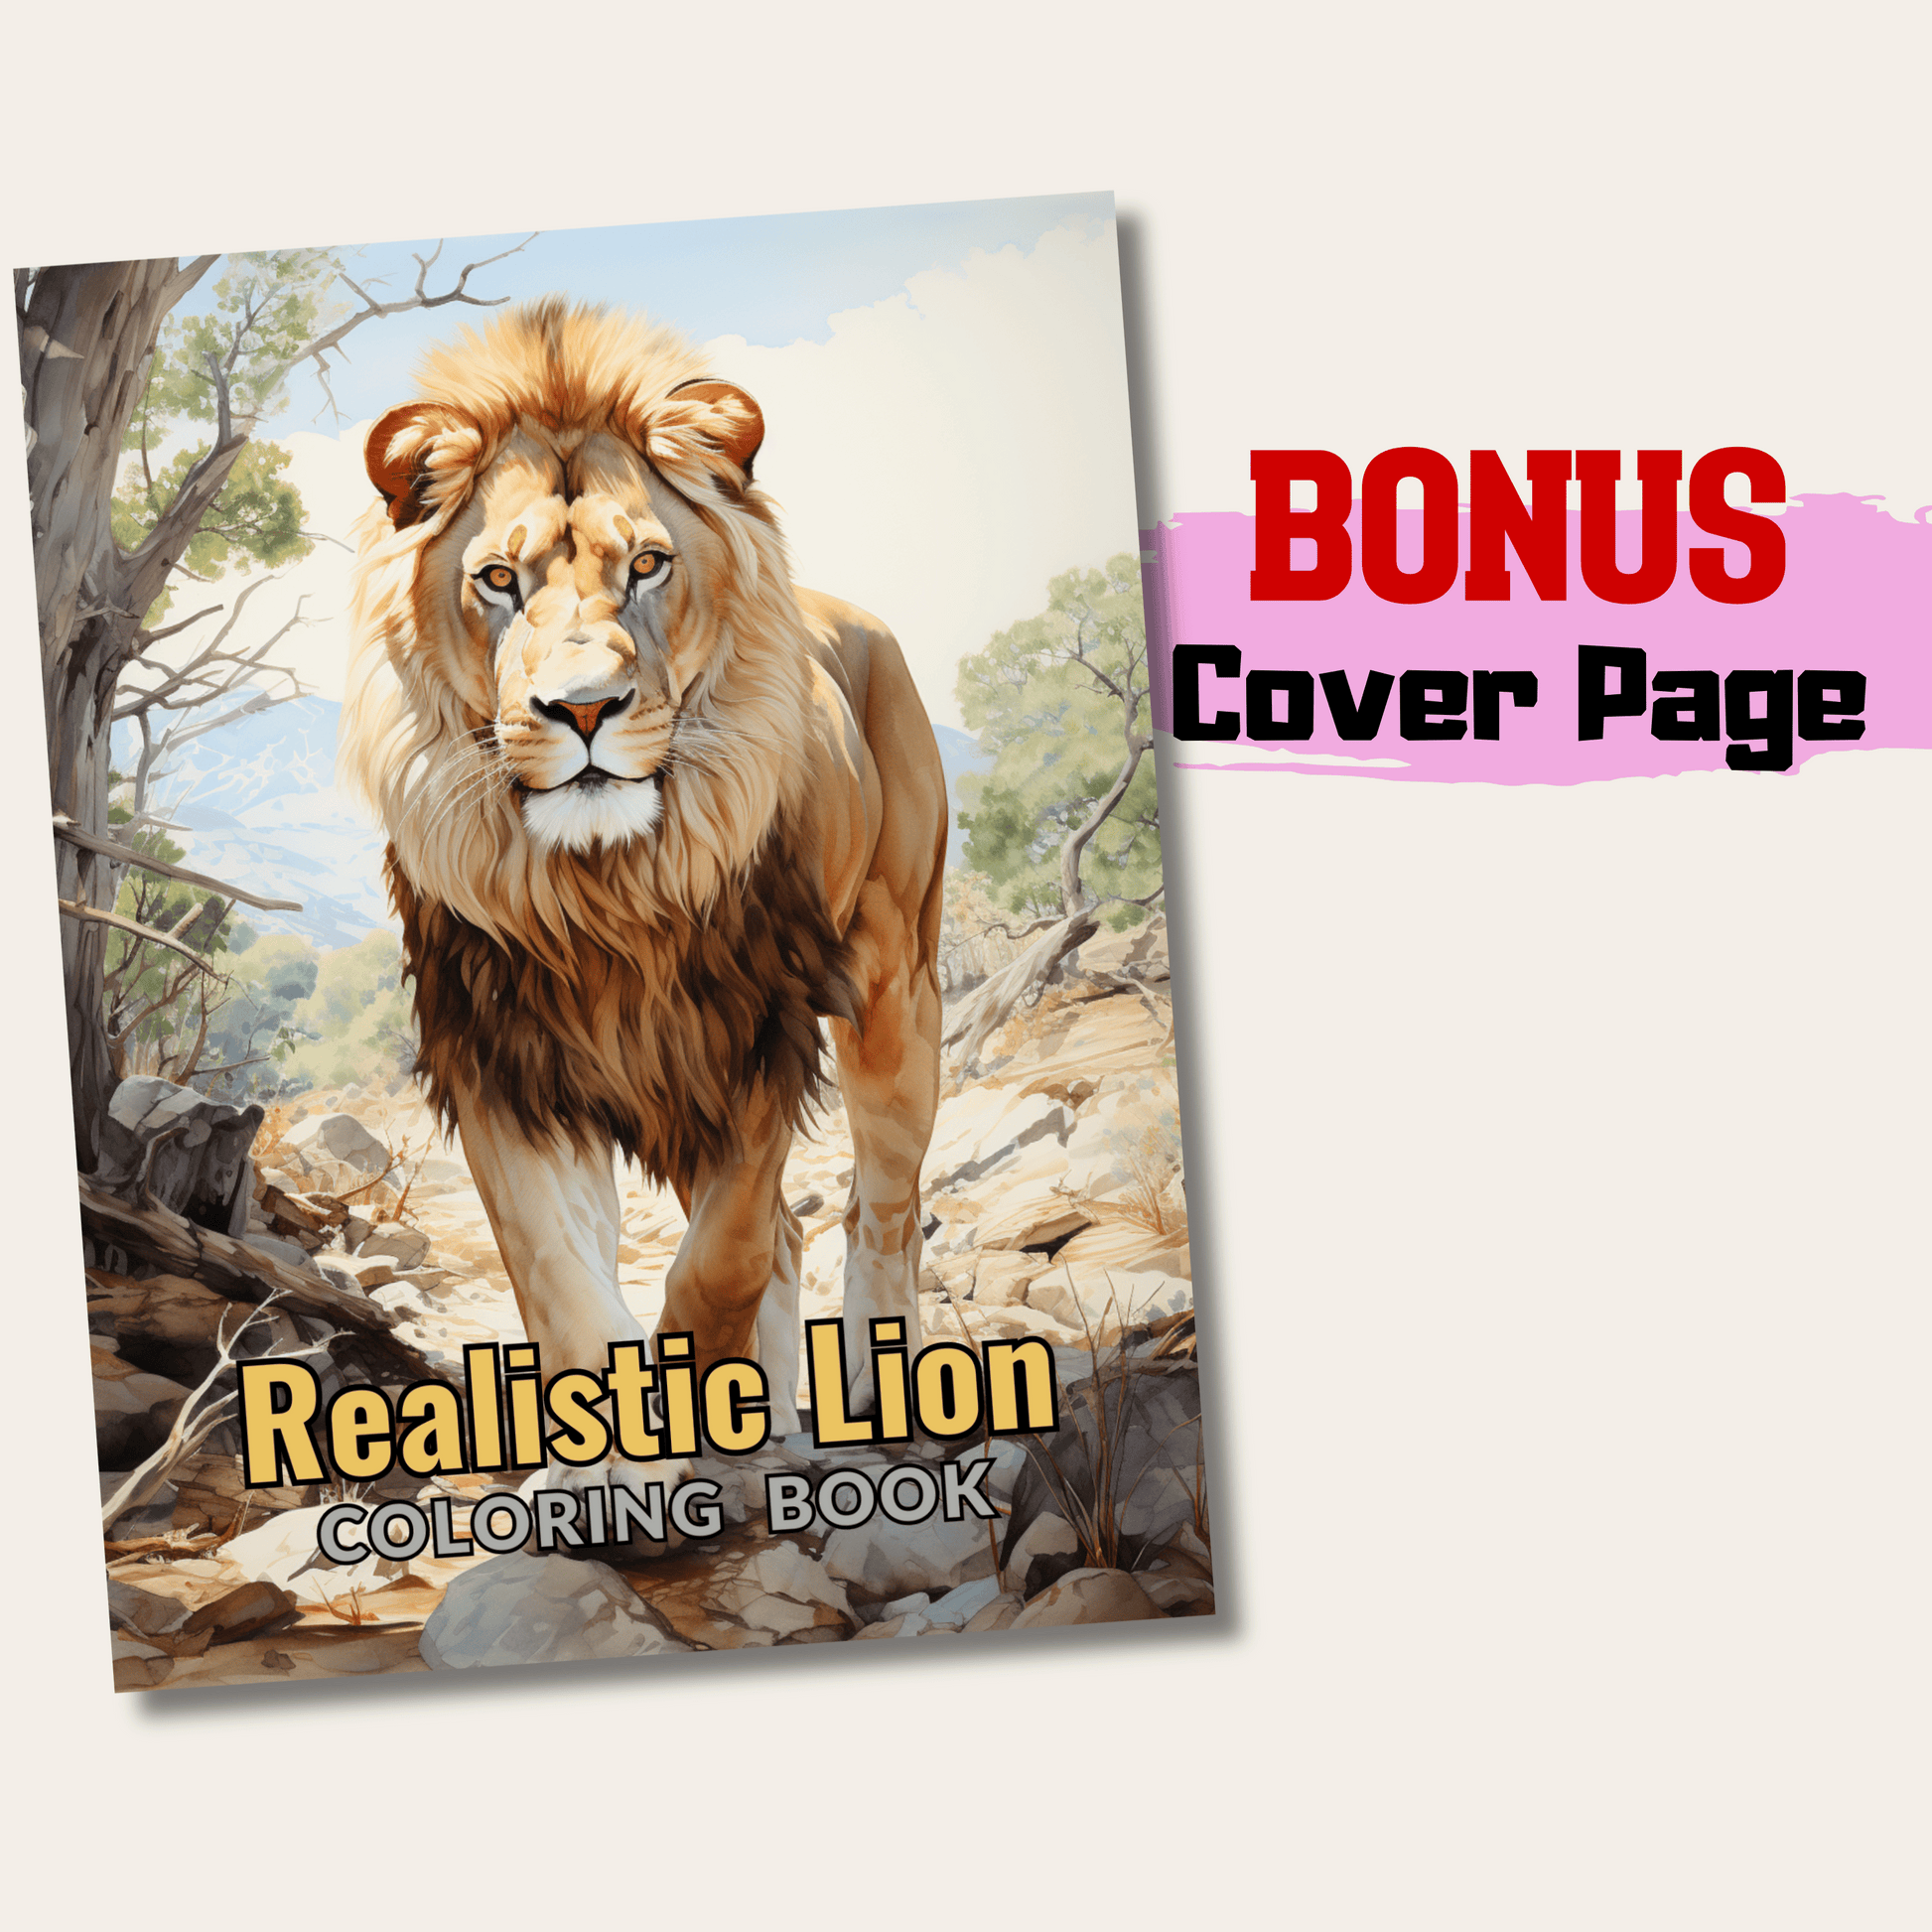 Pages realistic lion grayscale coloring book instant download pri â funny print for you